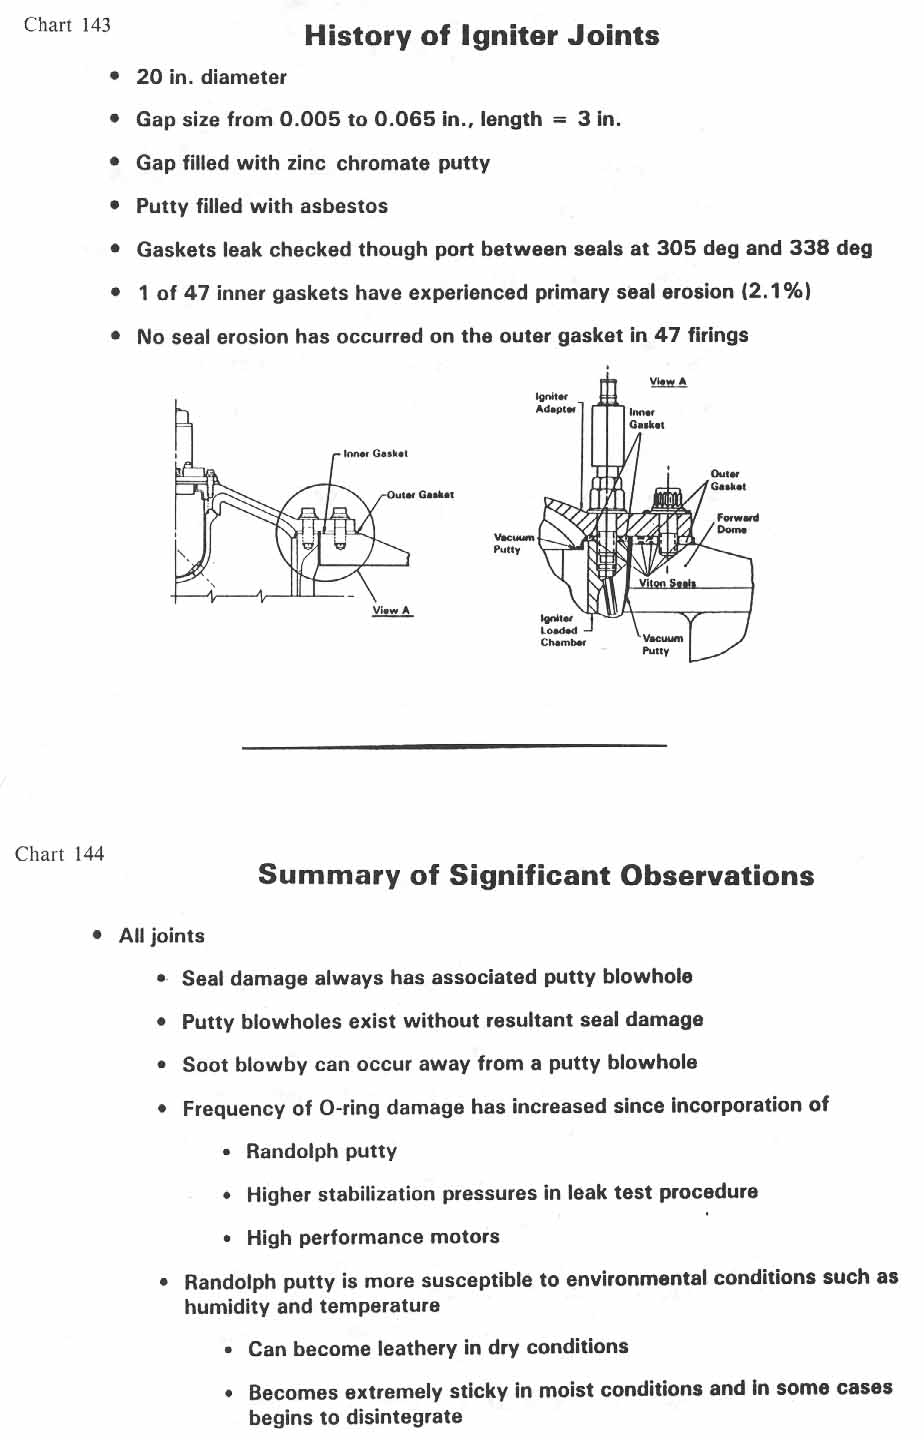 charts 143-144 [Chart 143: History of Igniter Joints; Chart 144: Summary of Significant Observations]